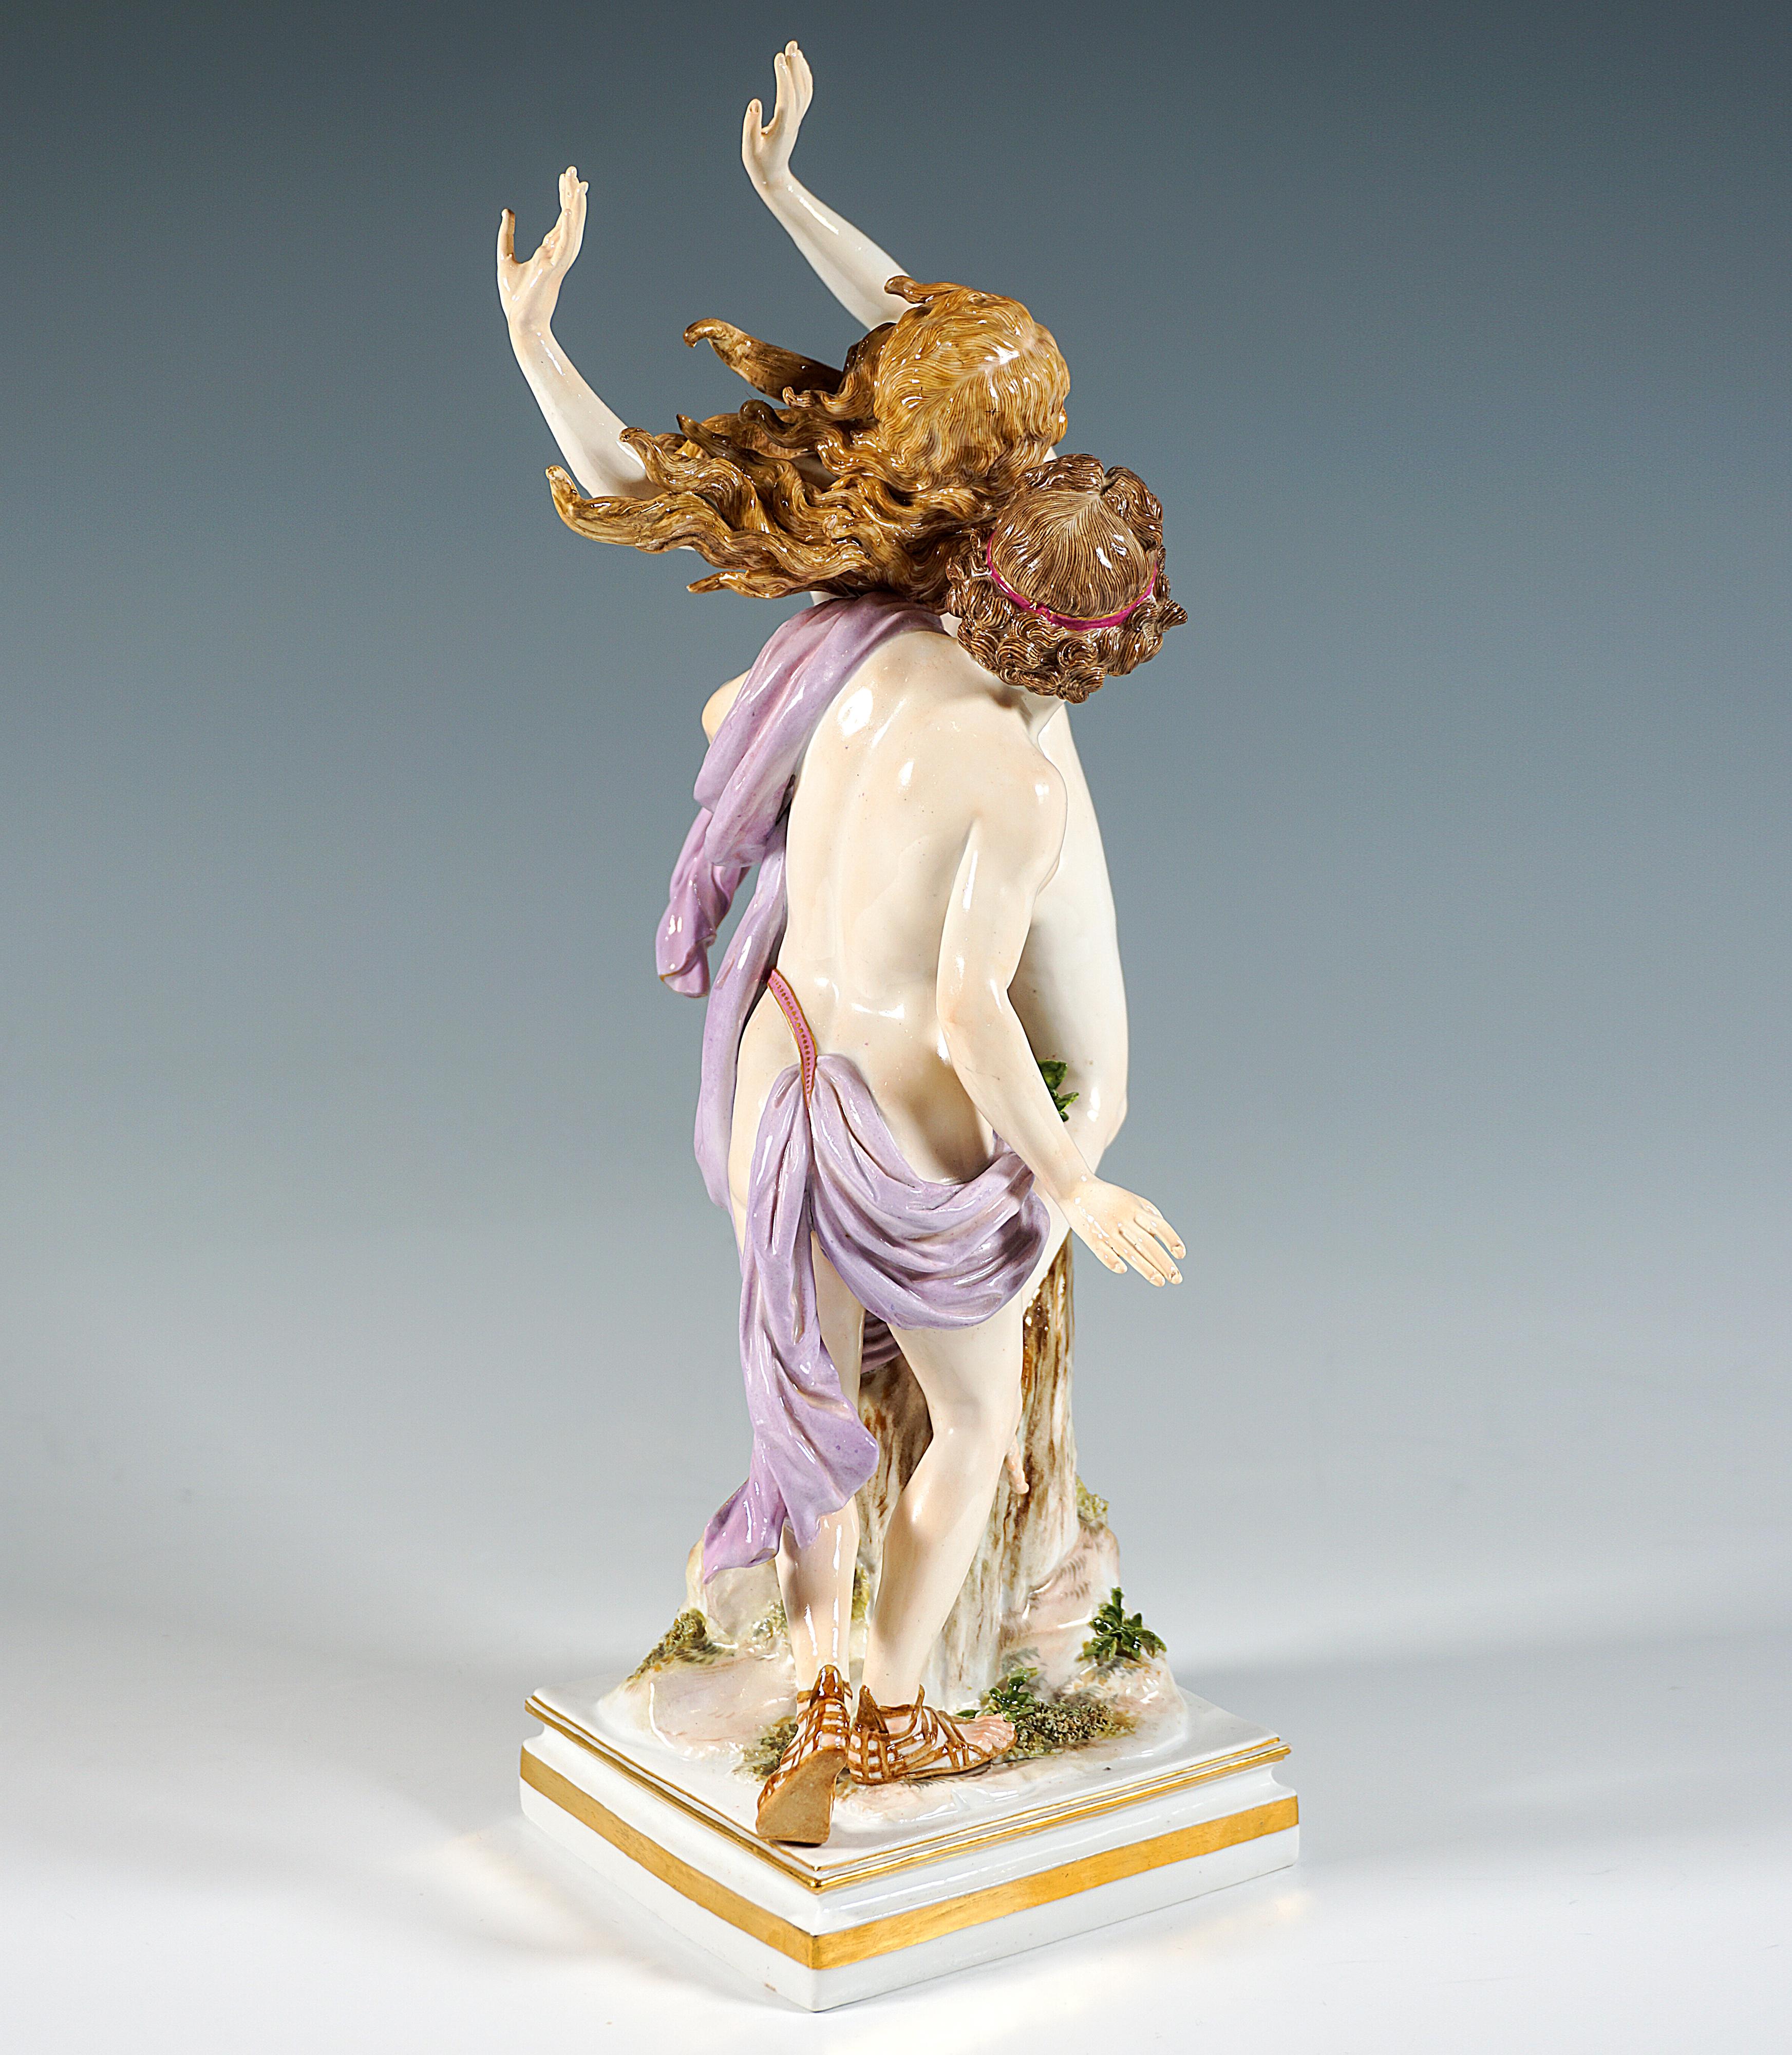 Excellent large and rare Meissen figurine group from the 19th century:
Apollo clothed with a cloak embraces Daphne from behind, who is fleeing from him and has already frozen into a laurel tree in a twisting movement.
Based on a stepped, fluted